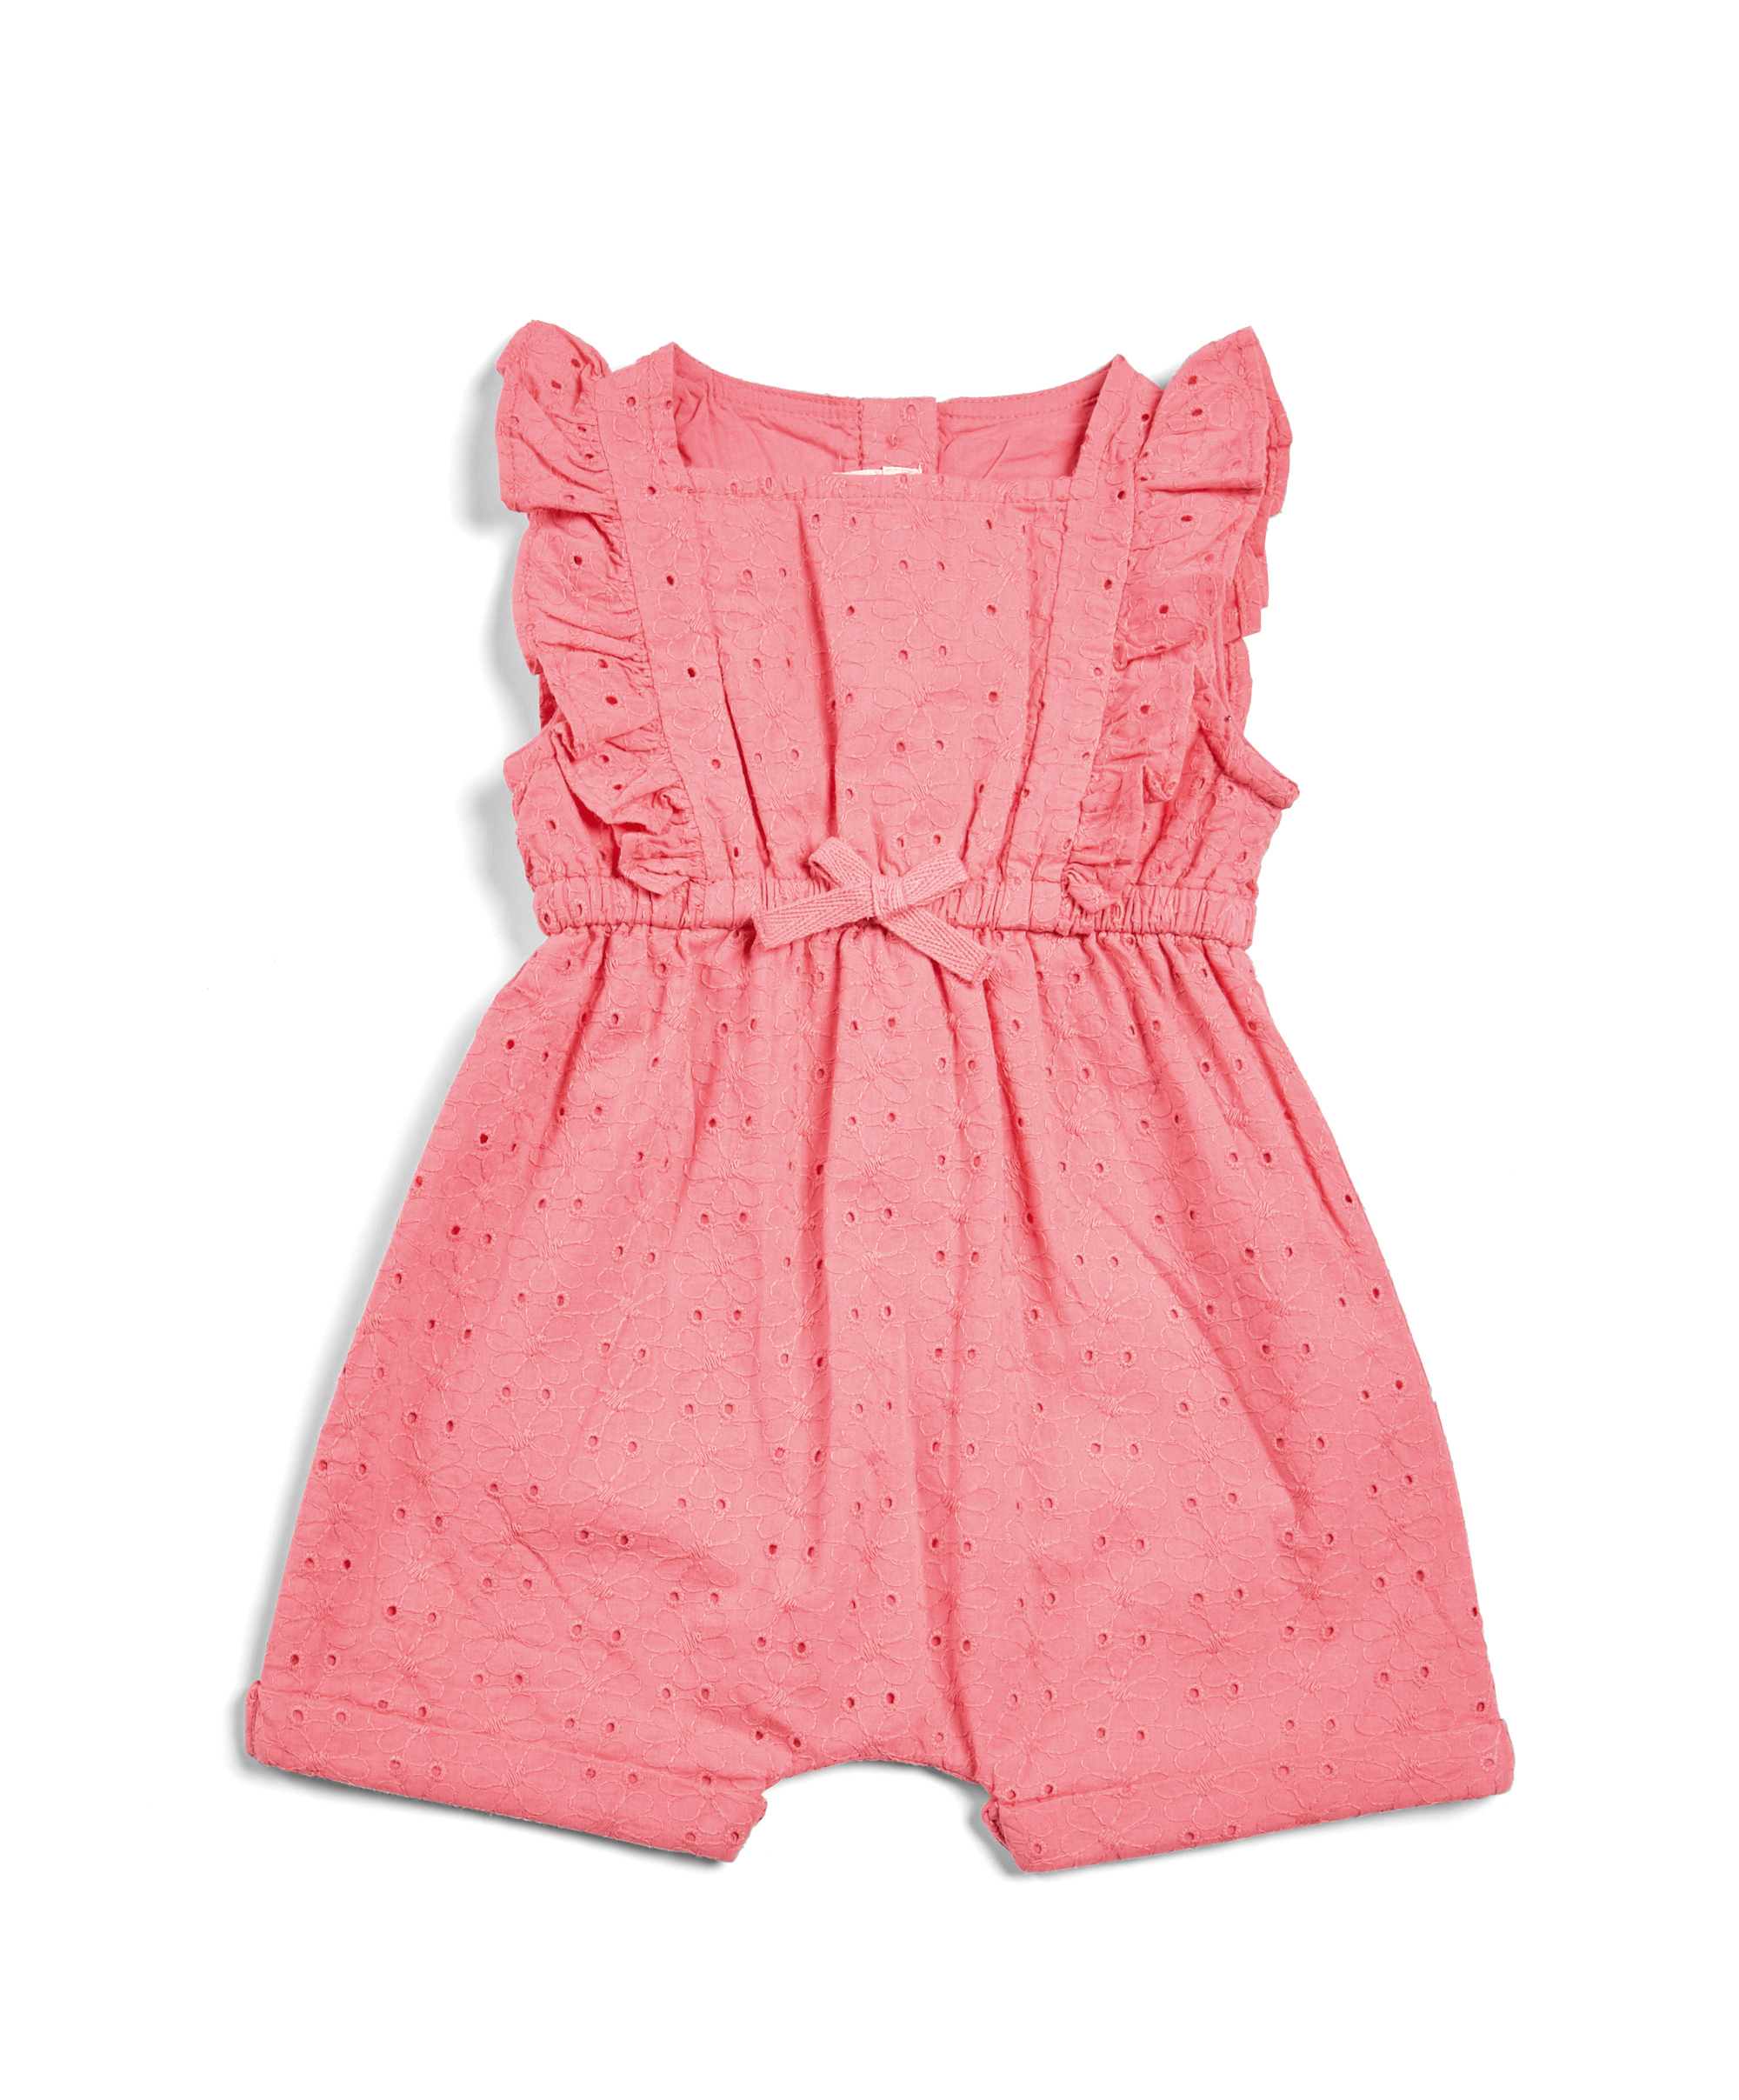 Buy Mamas & Papas BRODERIE FRILL RMPR: | 213684656 - All-in-Ones ...